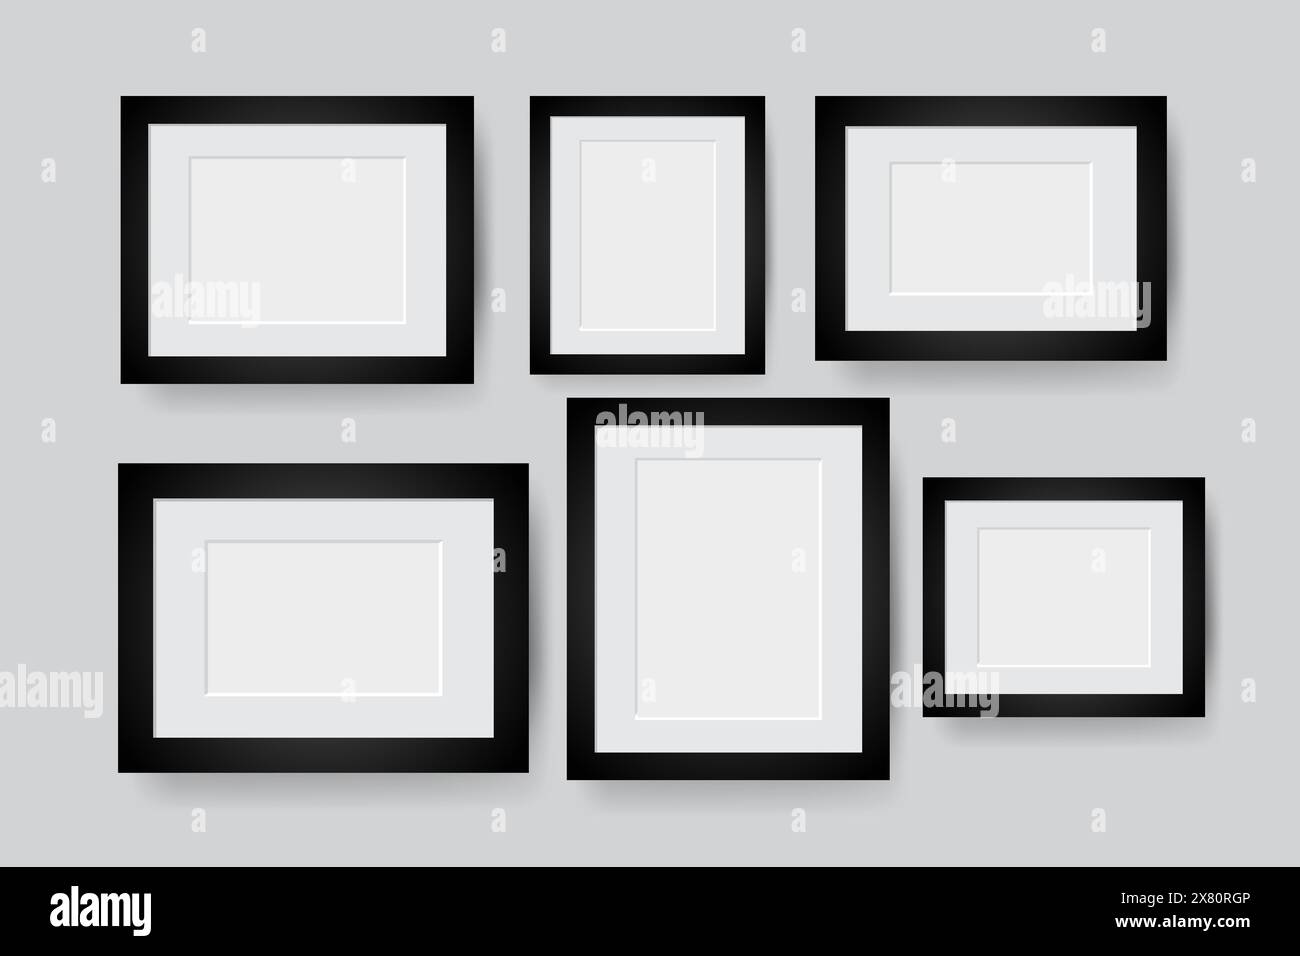 Templates for picture montage or collage using photos as the frames Stock Vector